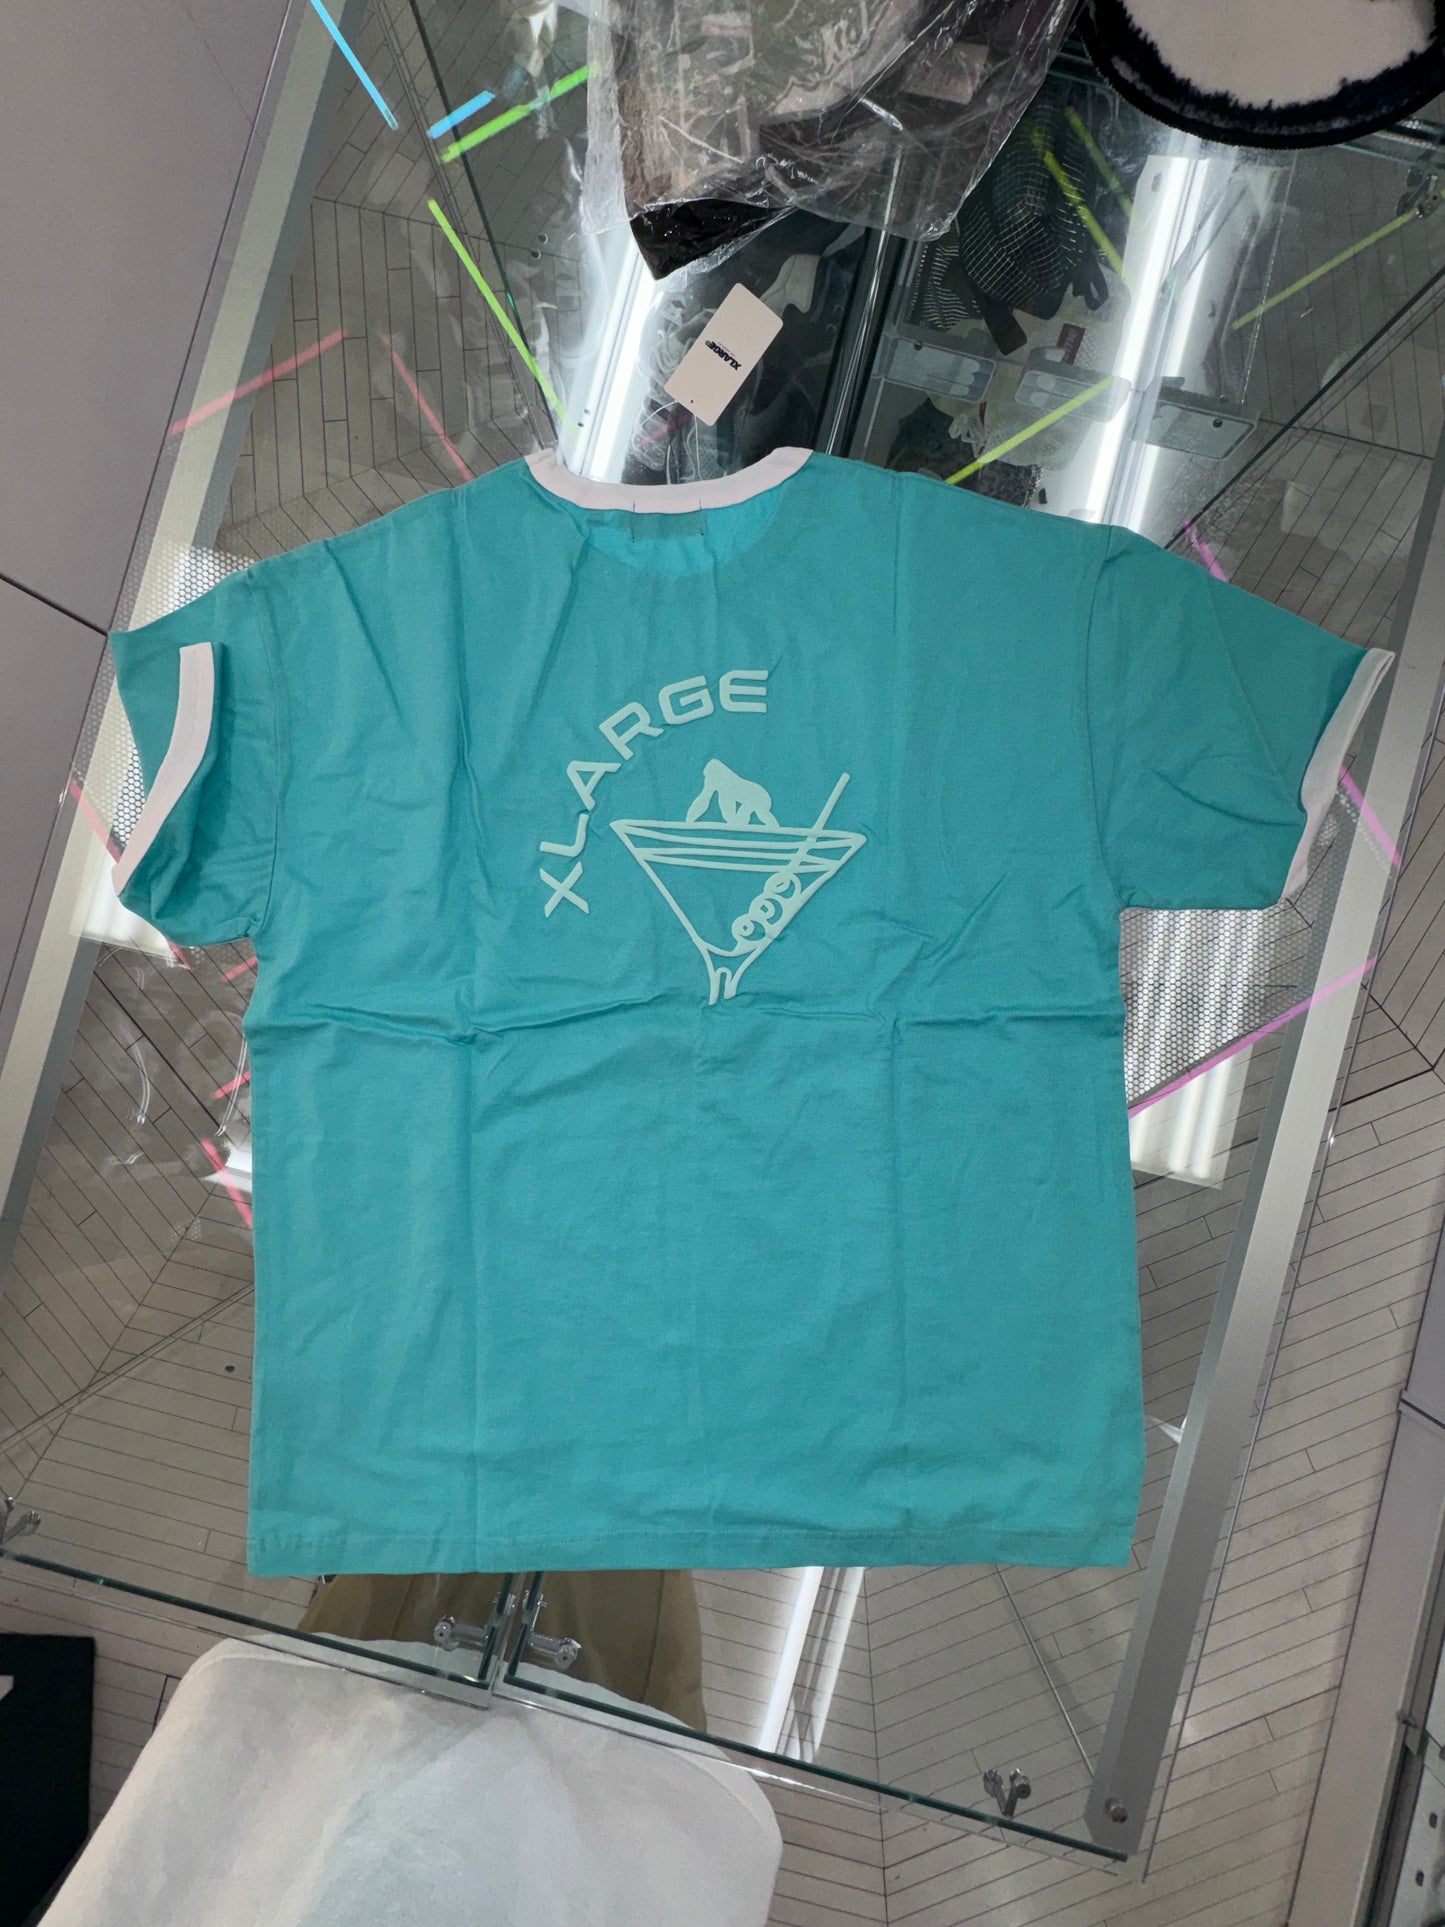 XLarge Japan exclusive 2019 era Tee classic higher quality teal